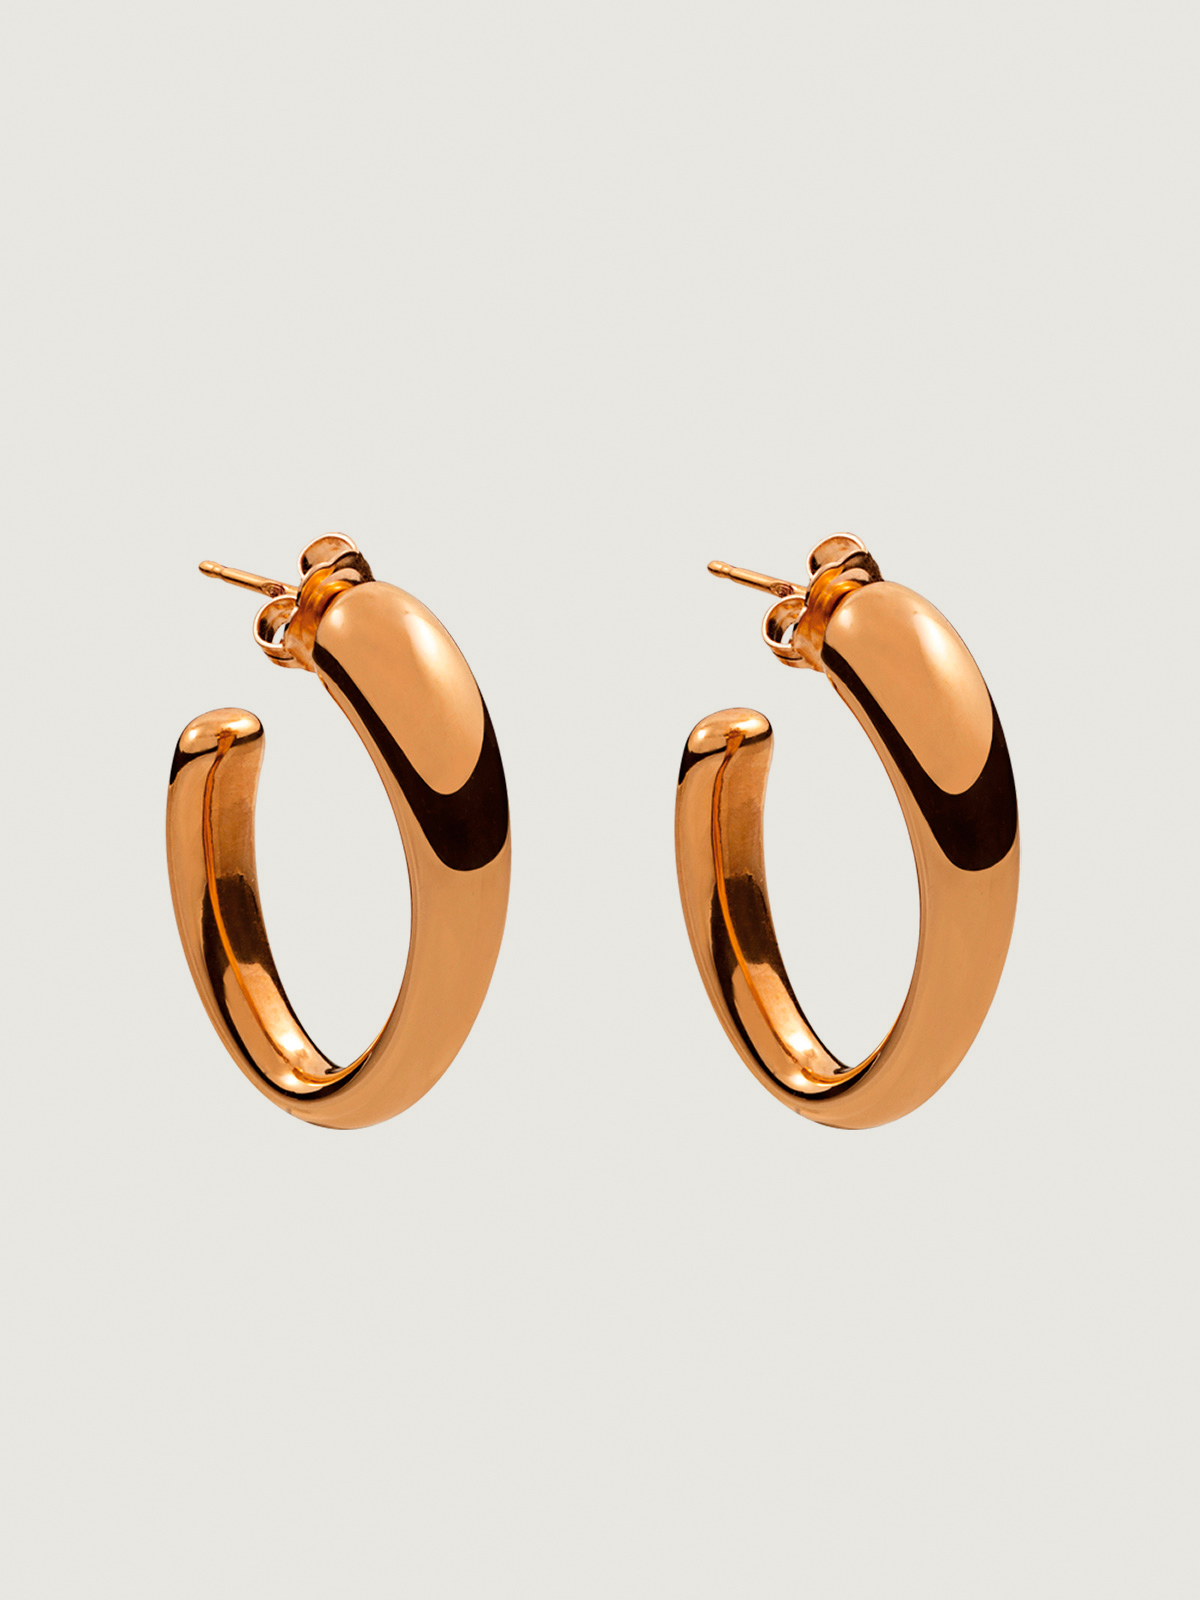 Large and thick 925 silver hoop earrings bathed in 18K rose gold with an oval shape.